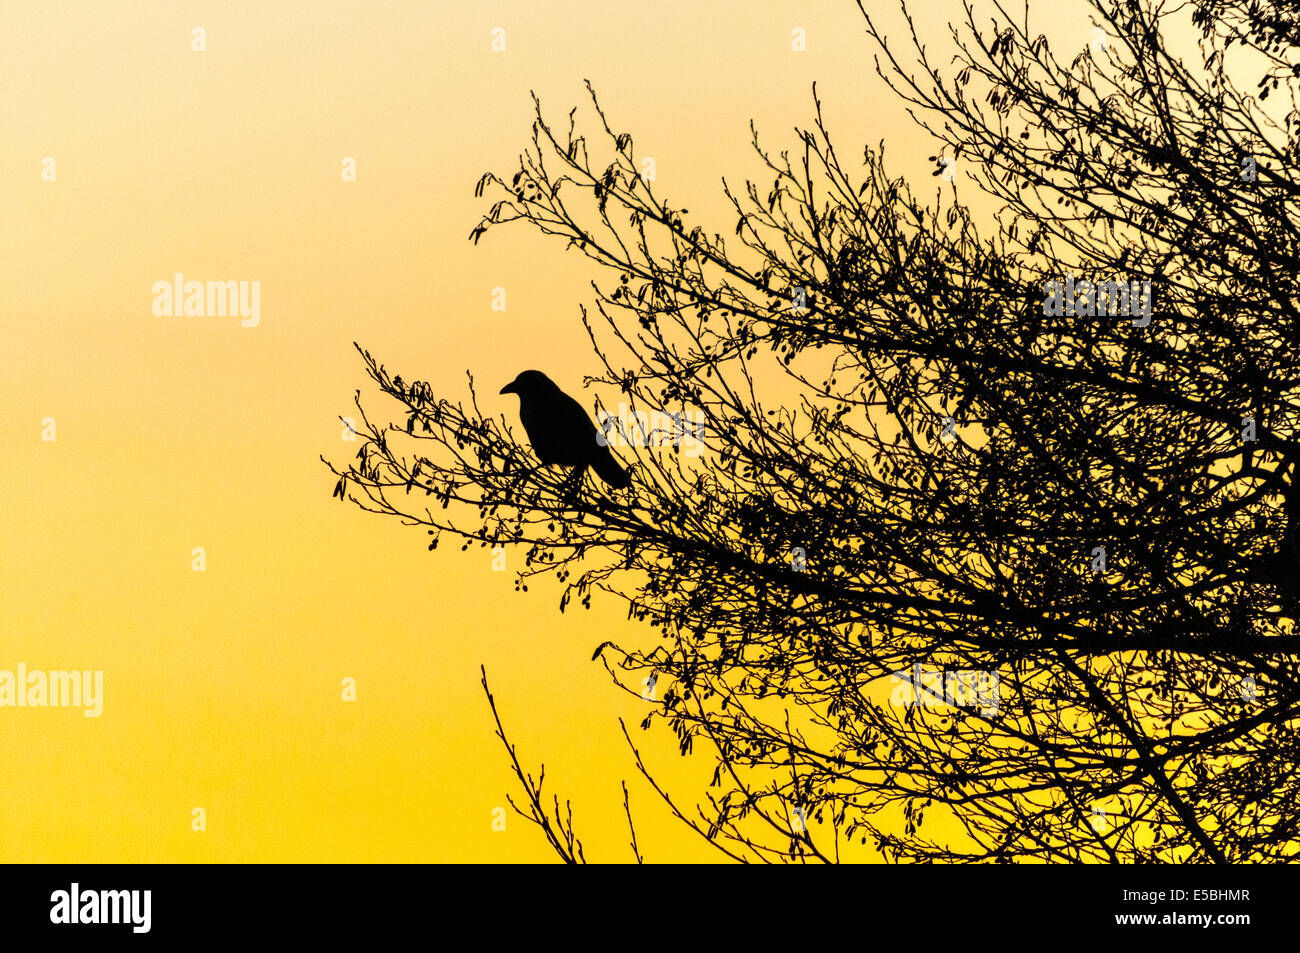 A Carrion Crow,Corvus corone, silhouetted against a winter evening sky Stock Photo